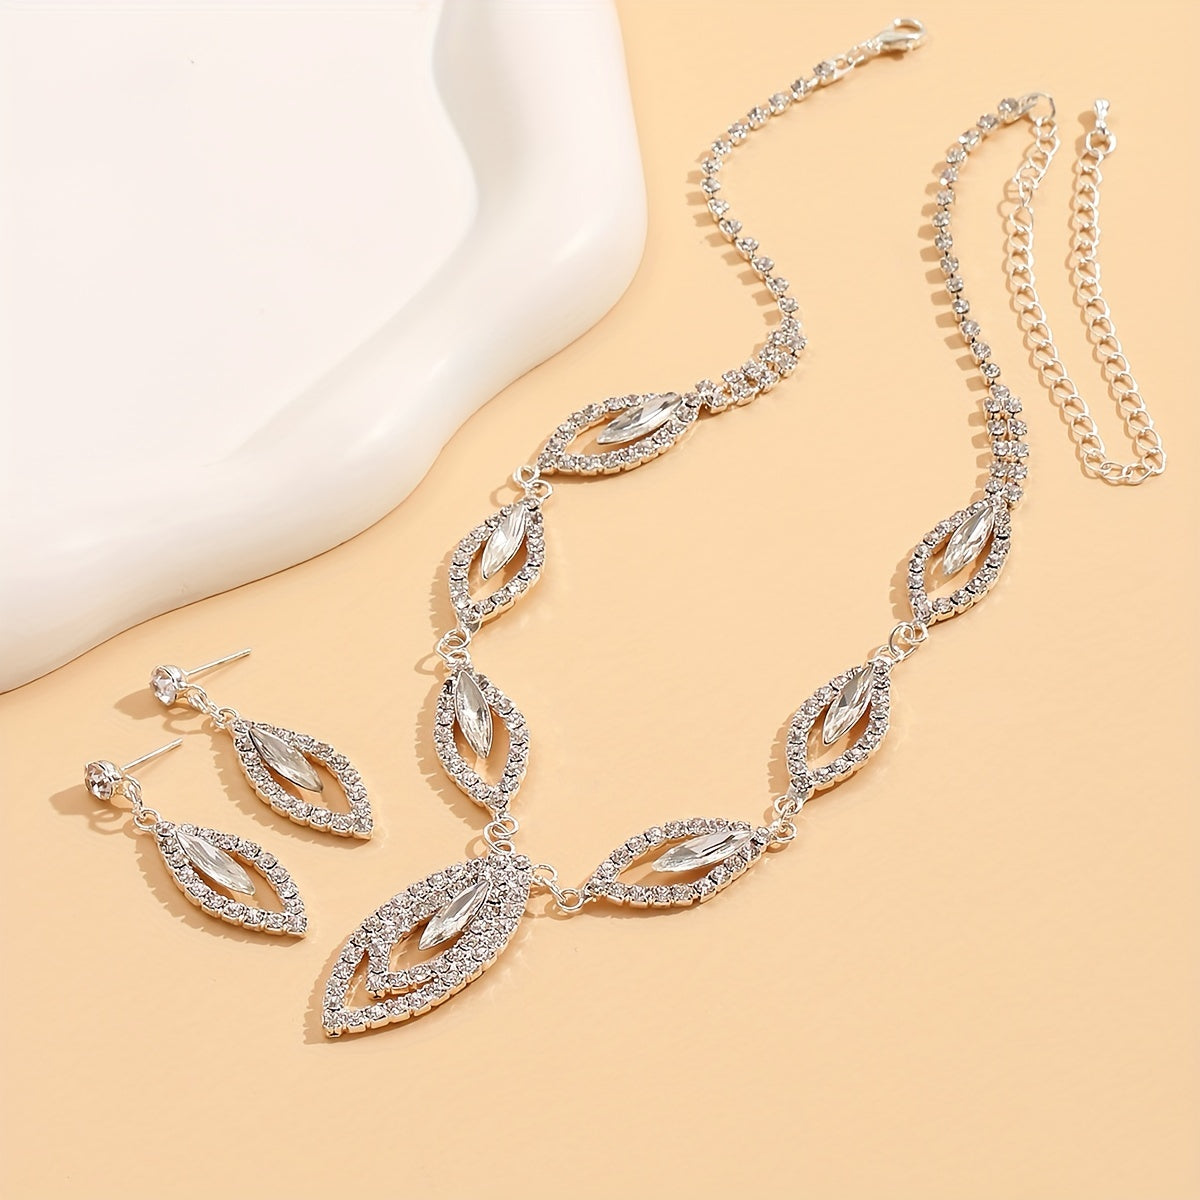 Elegant Hollow Out Jewelry Set for Weddings and Special Occasions - Includes Pendant Necklace and Dangle Earrings